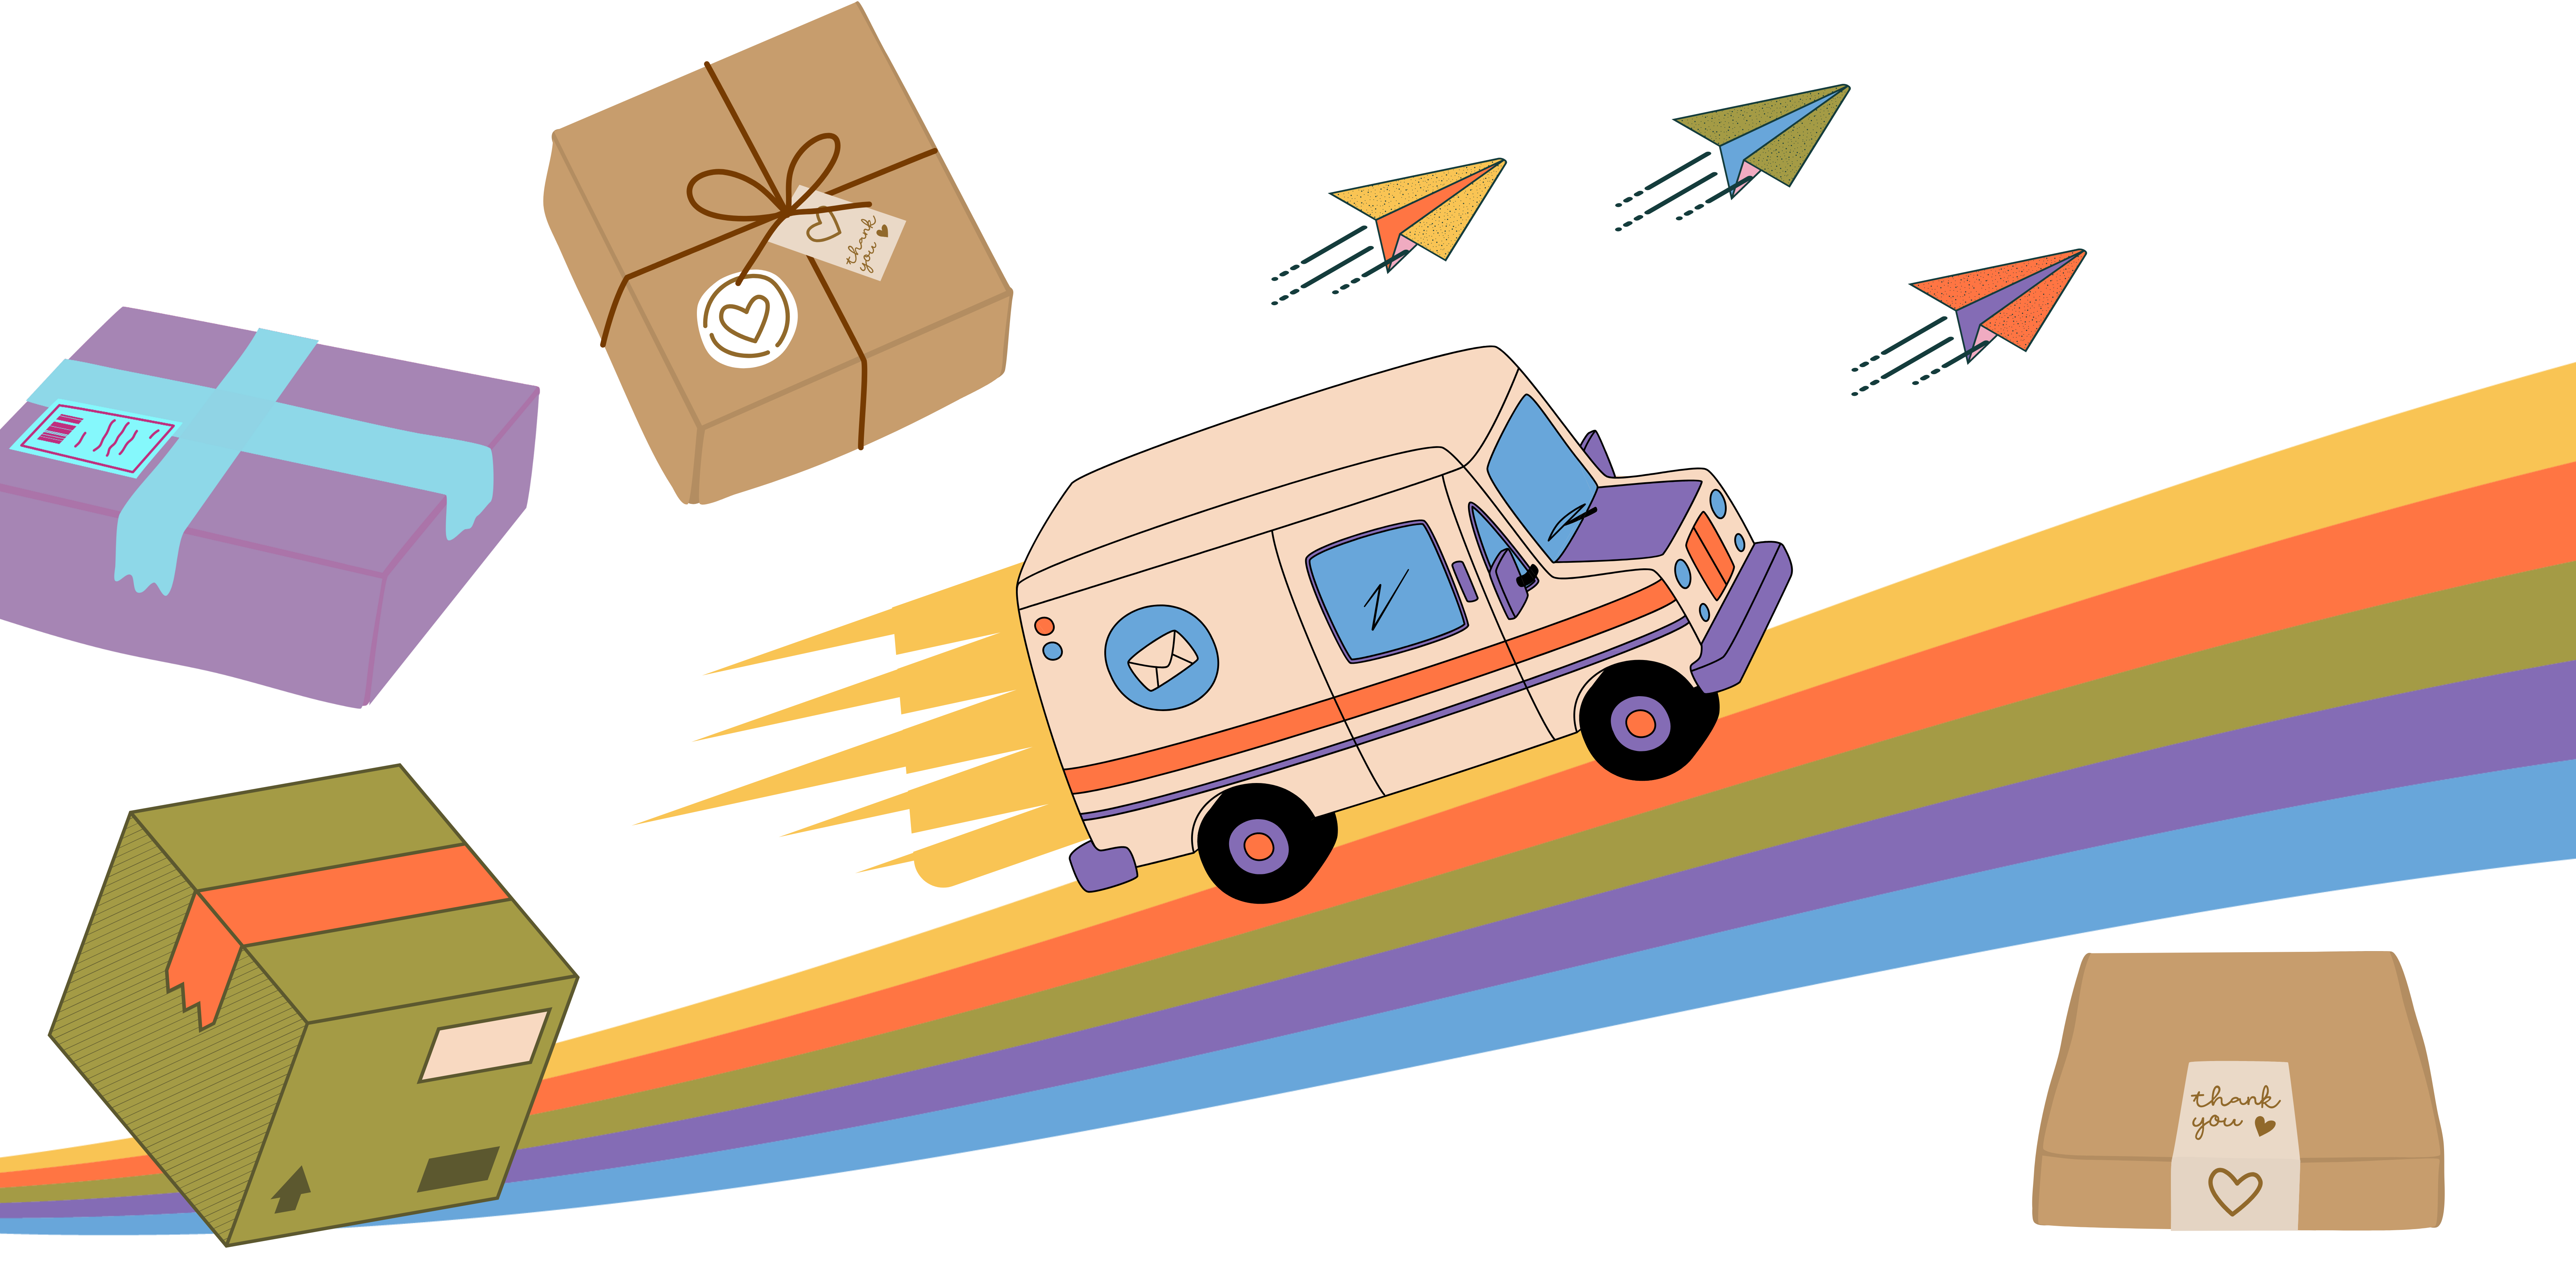 Electrical Outlet Cover Plates Delivery, Clip-art of packages following a colorful mail truck in the air as it drives on a rainbow, led by paper airplanes to symbolize our SUPER FAST DELIVERY AND ORDER FULFILLMENT on Electrical Outlet Cover Plates.